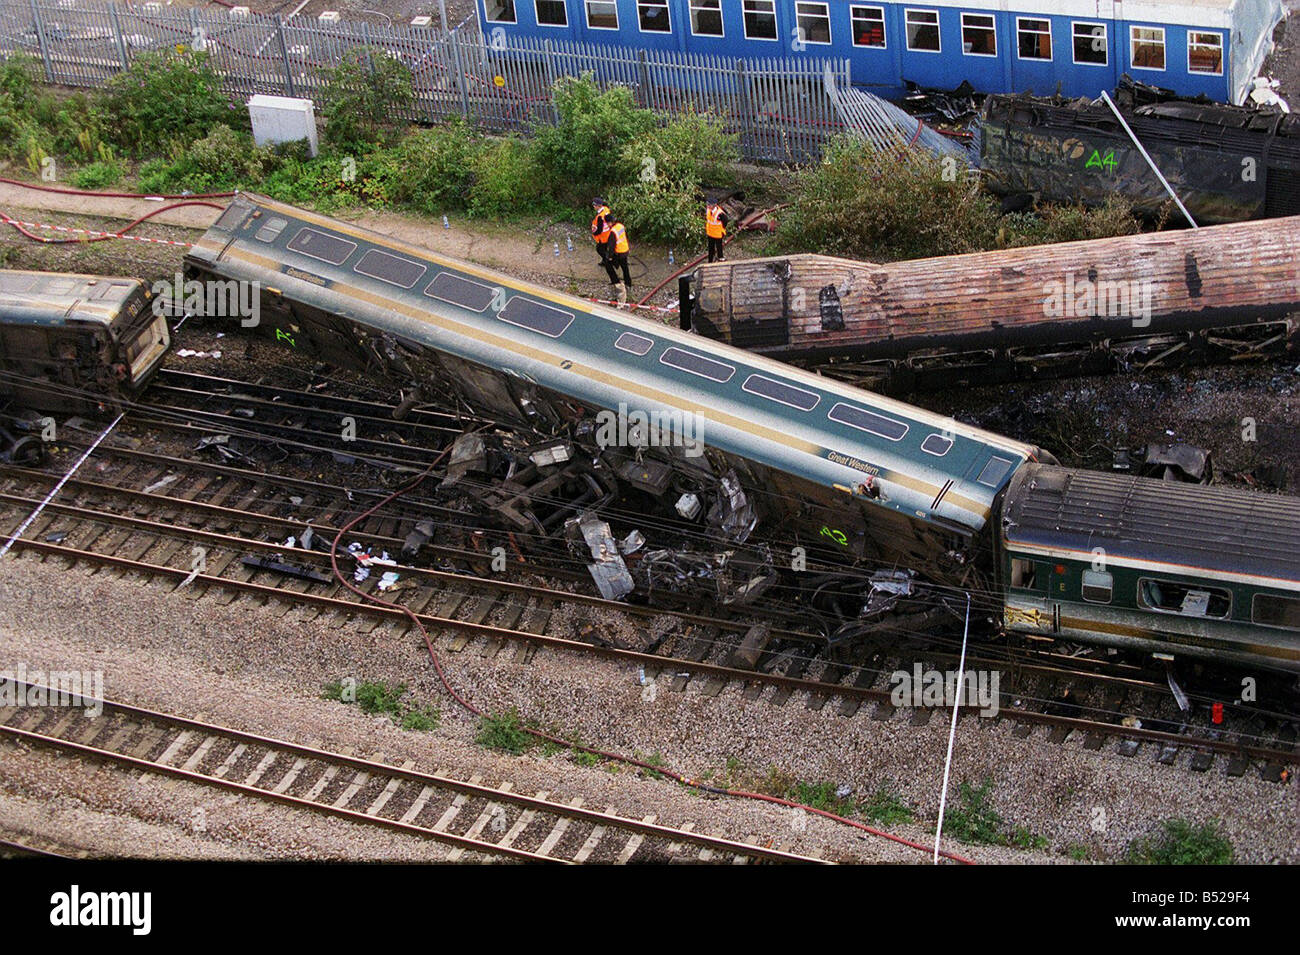 Overhead view of the Paddington Railway Accident Oct 1999 Derailed carriage of train involved in the crash on its side next to a burnt out wrecked carriage in Ladbroke Grove near Paddington Station Stock Photo